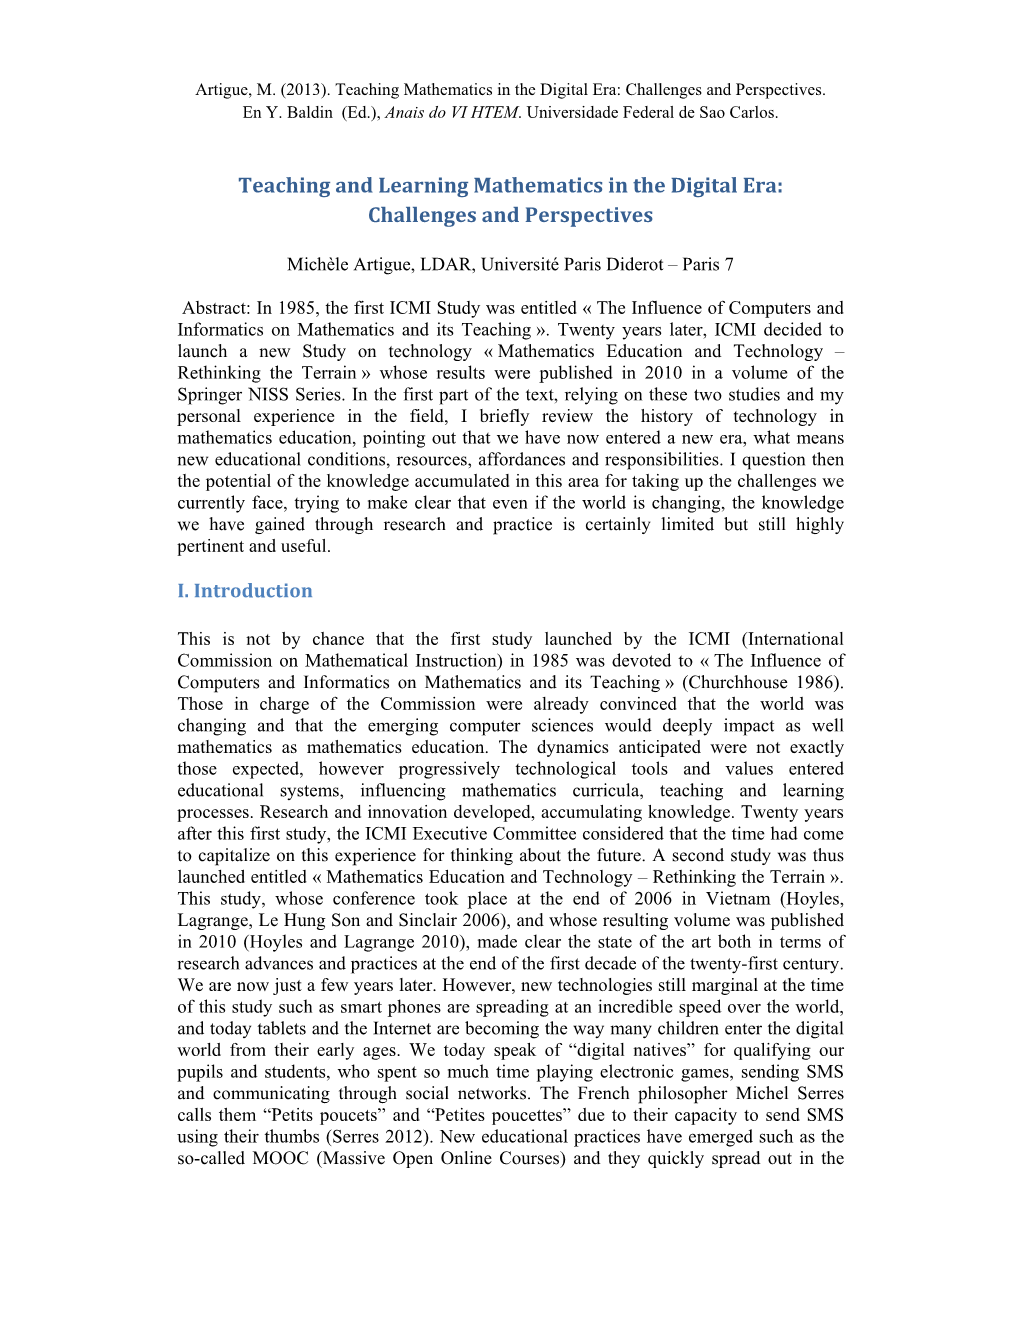 Teaching and Learning Mathematics in the Digital Era: Challenges and Perspectives